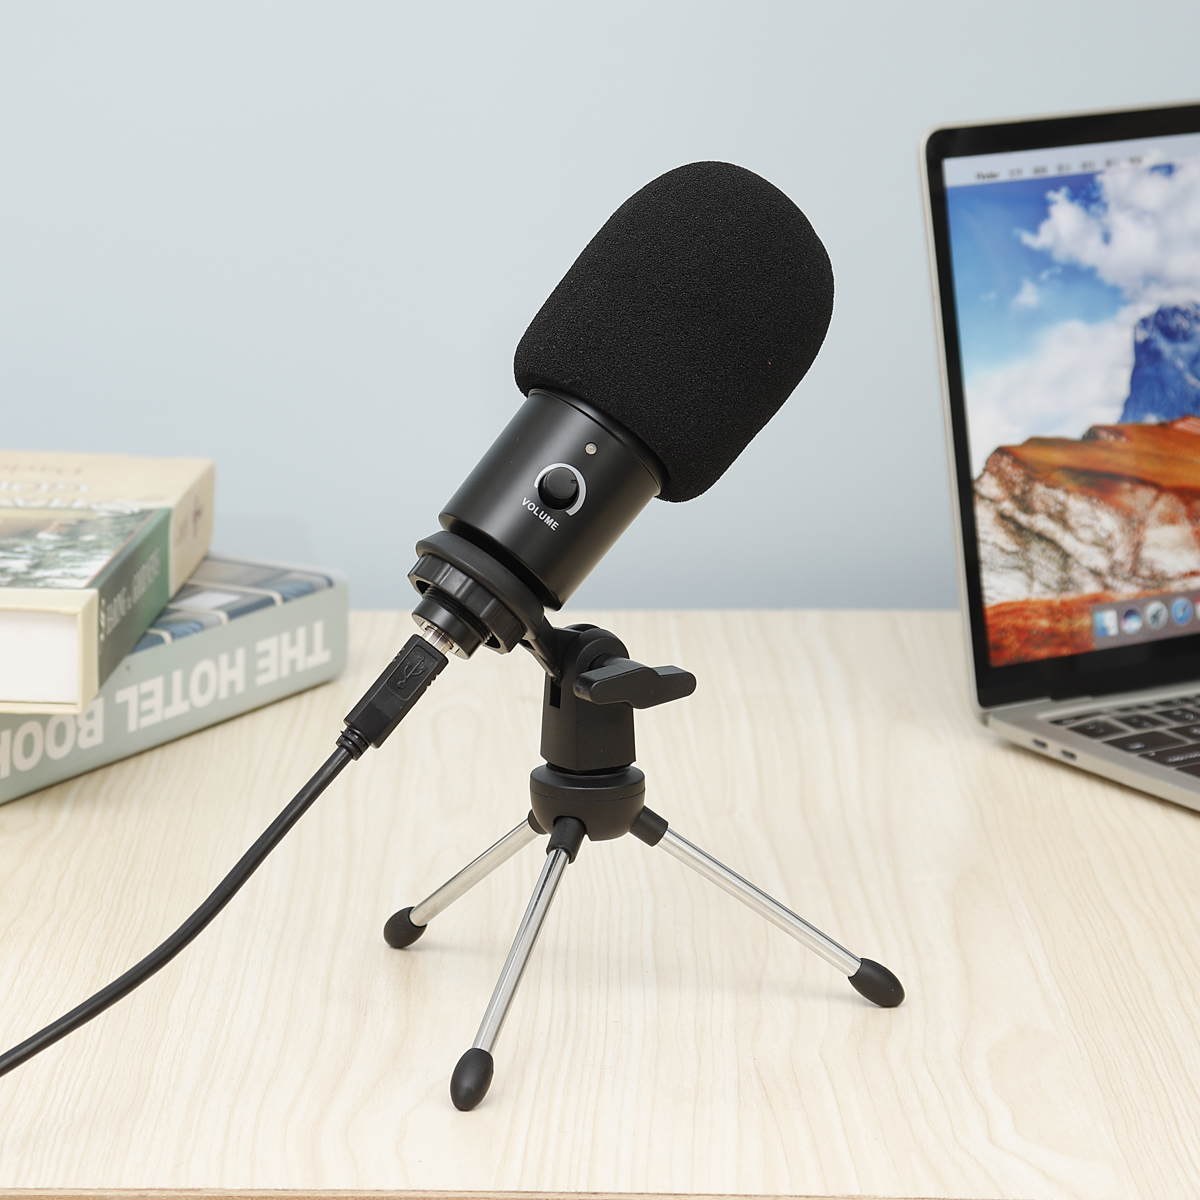 Wired-USB-Microphone-with-Tripod-for-Computer-Windows-for-Mac-PC-Live-Broadcast-Video-Conferencing-A-1866200-1